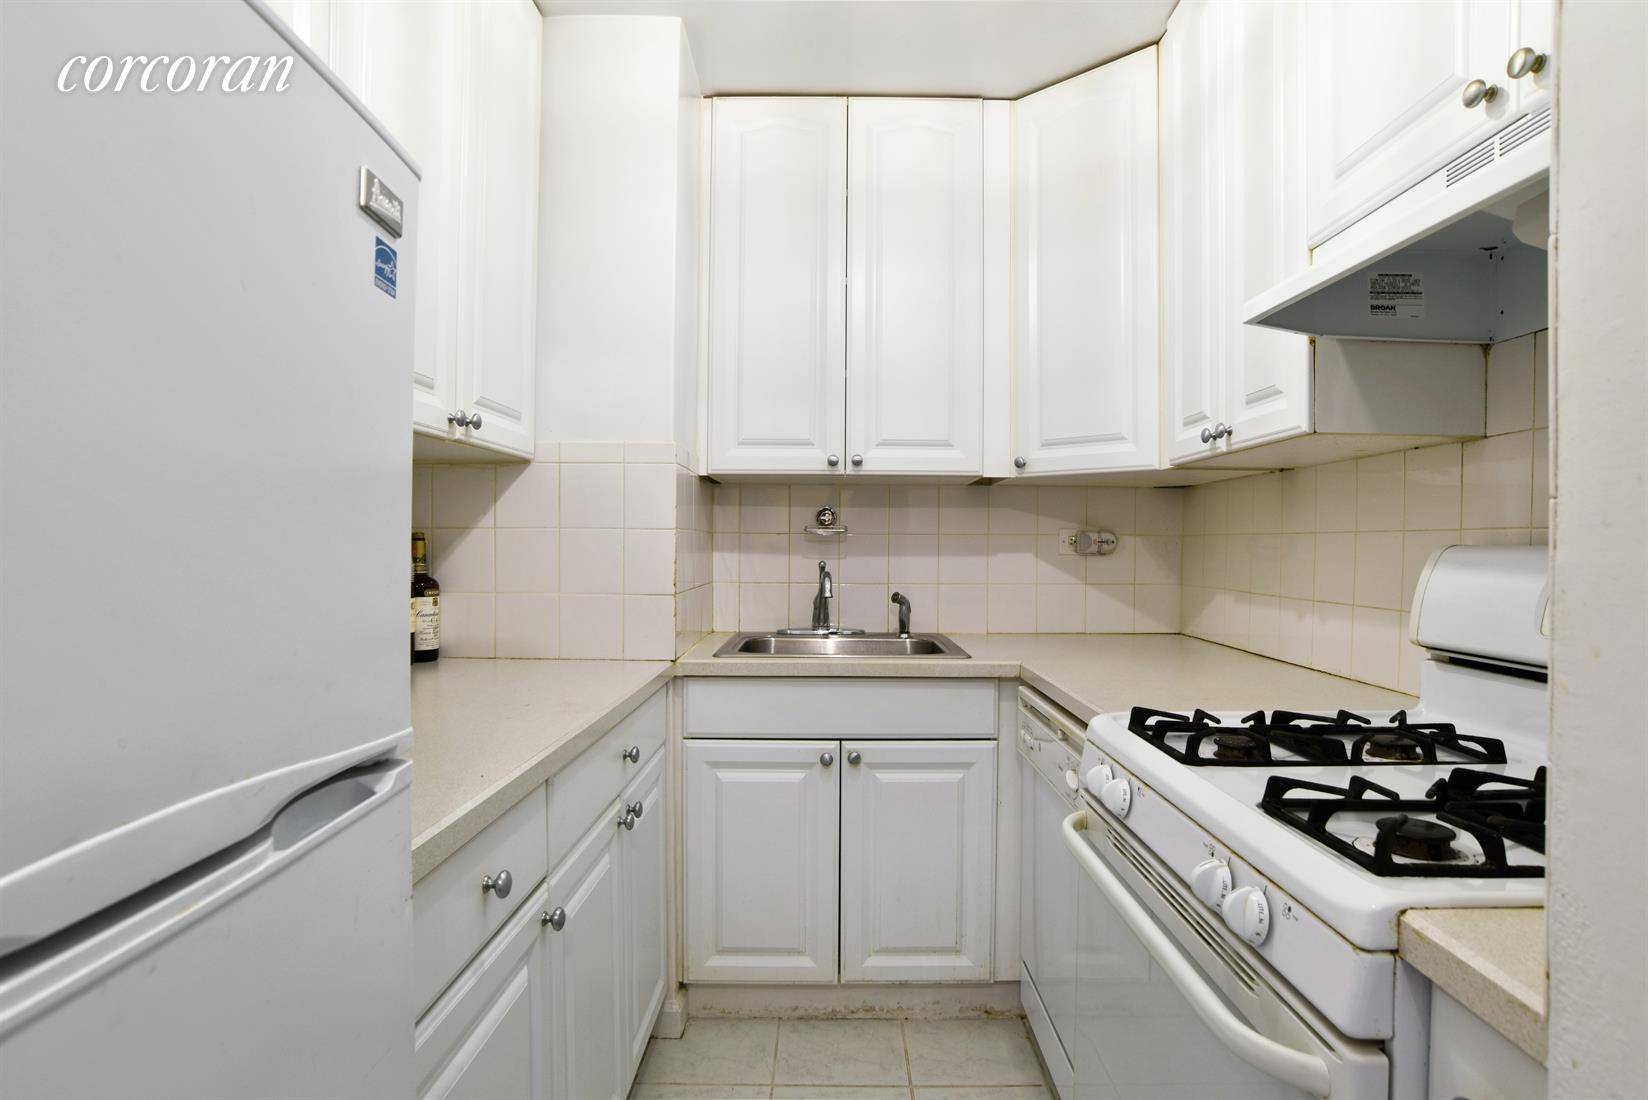 This white glove, full service, Caton Towers apartment is waiting for your arrival.